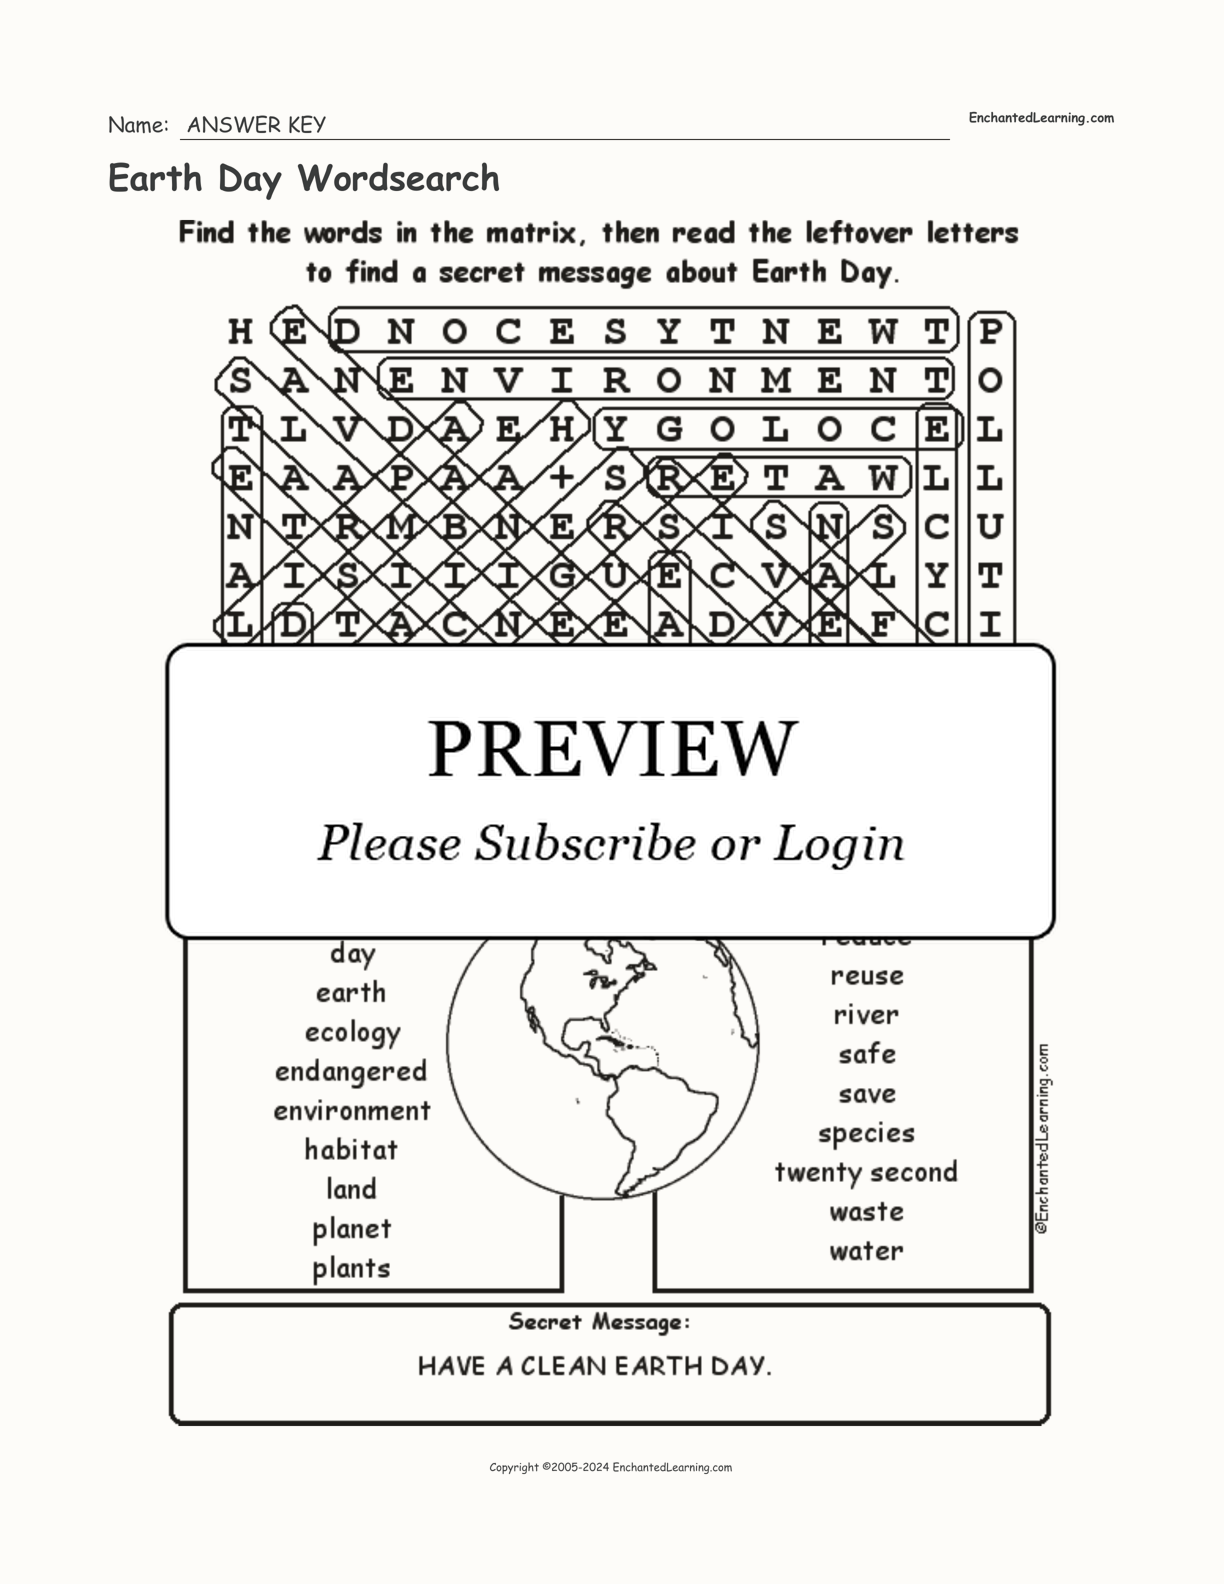 Earth Day Wordsearch interactive worksheet page 2